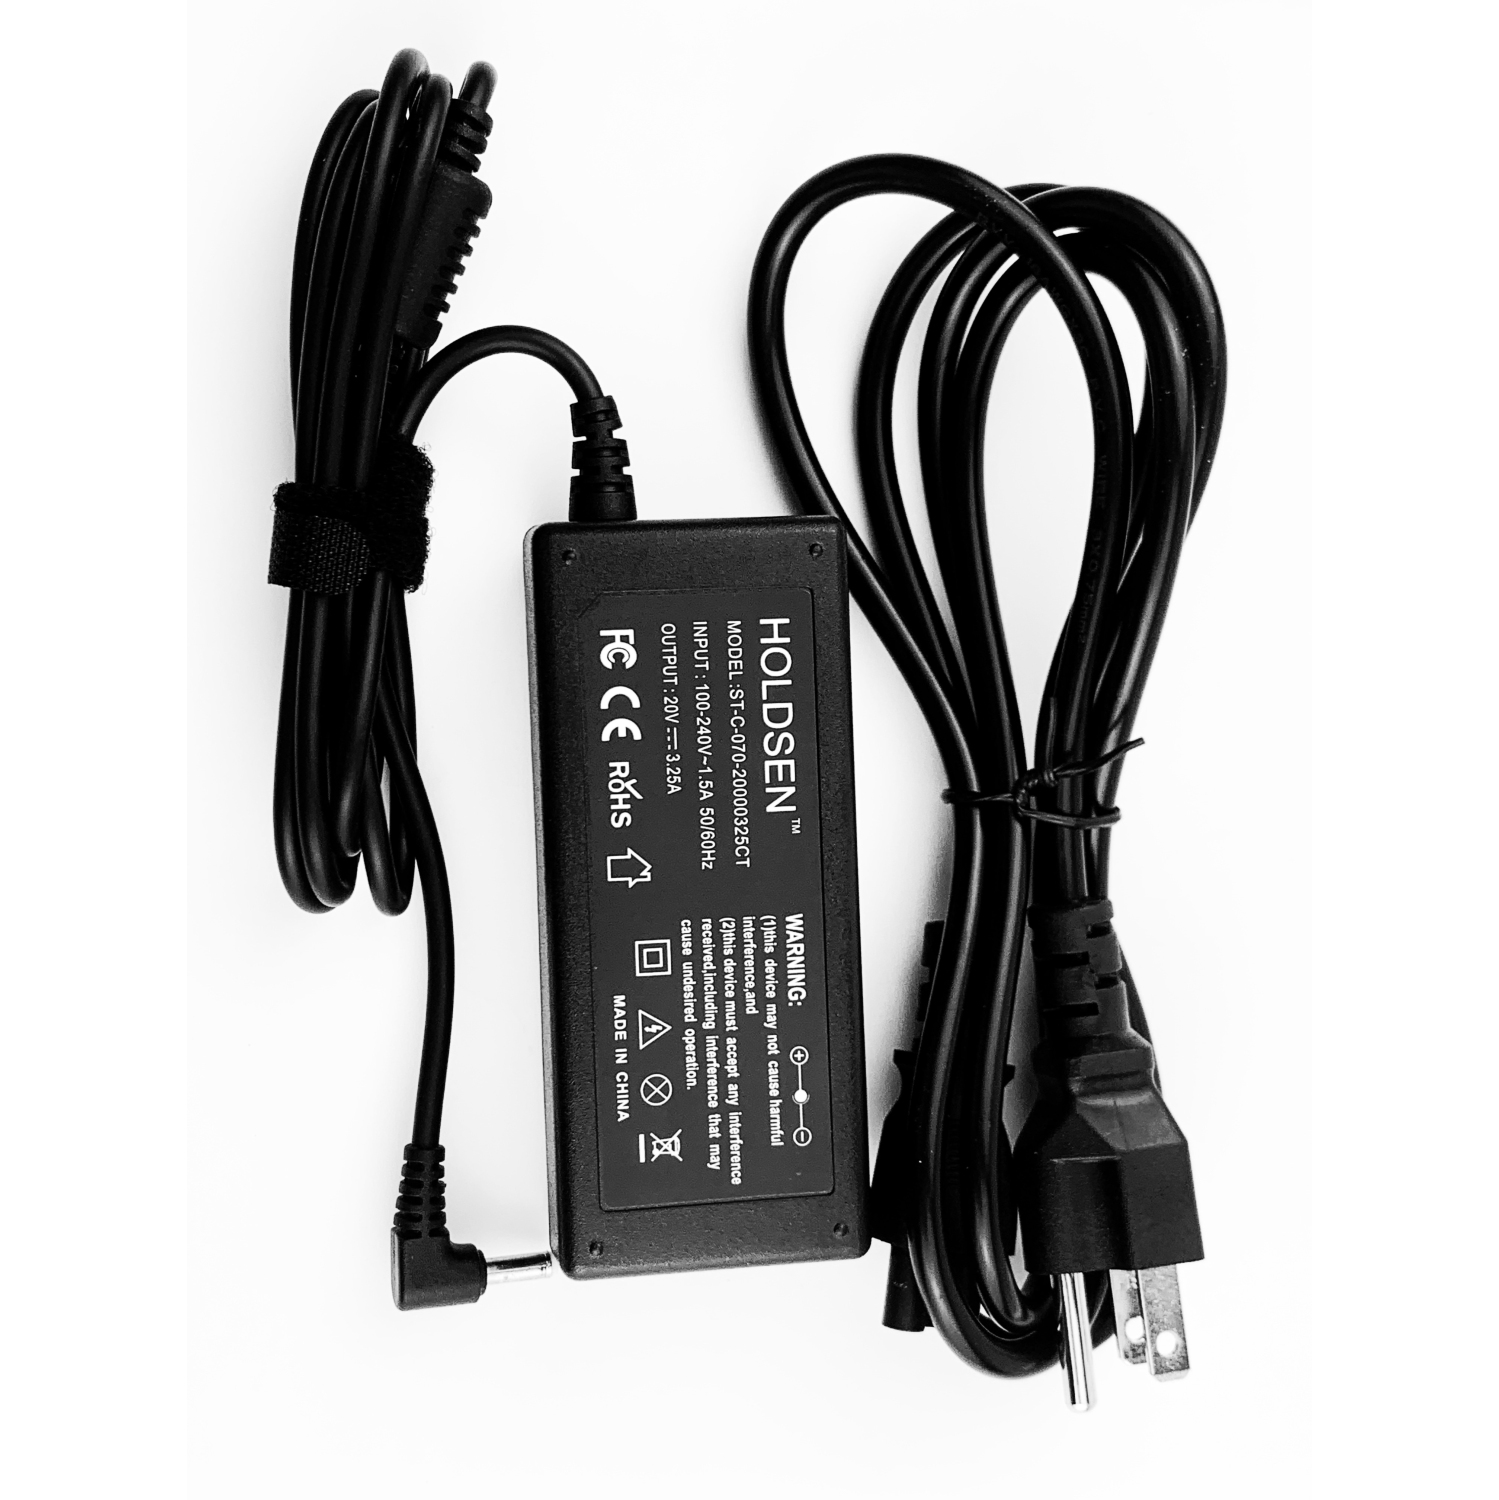 20V 3.25A 4.0mm x 1.7mm tip 65W AC adapter power cord charger for Lenovo Part No 01FR001 IdeaPad 110-15IBR 80T7